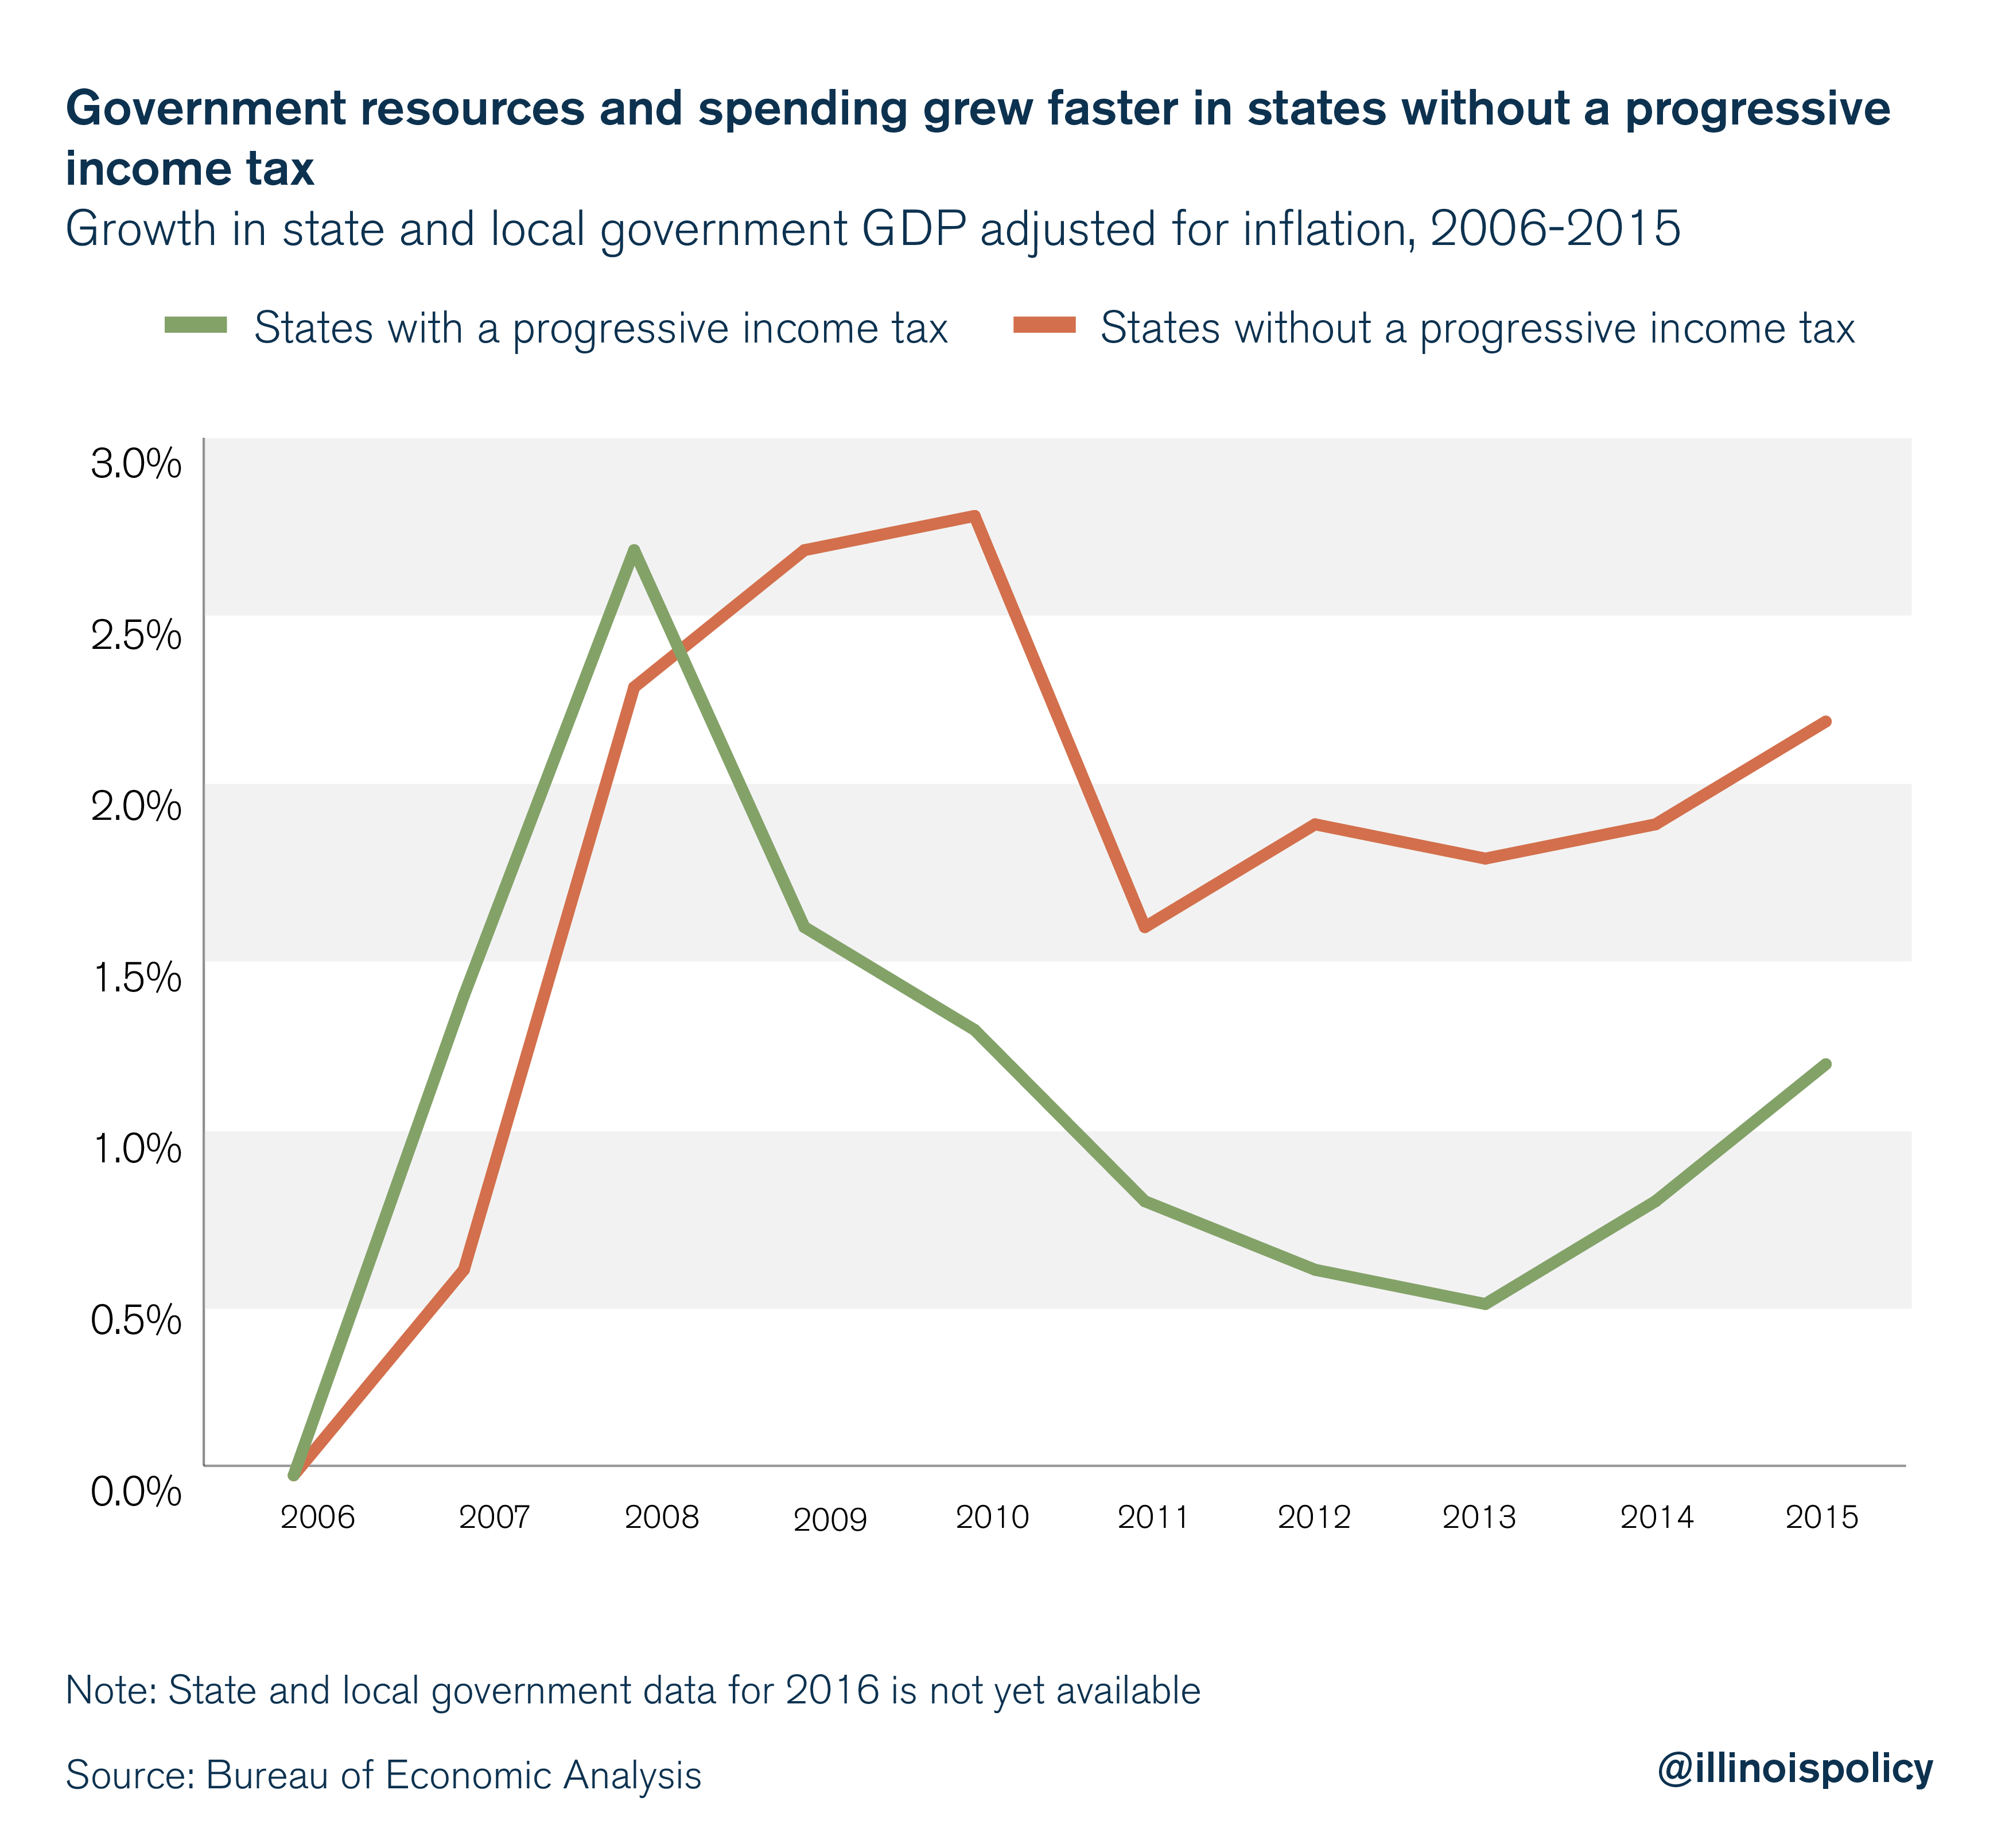 Government resources and spending grew faster in states without a progressive income tax